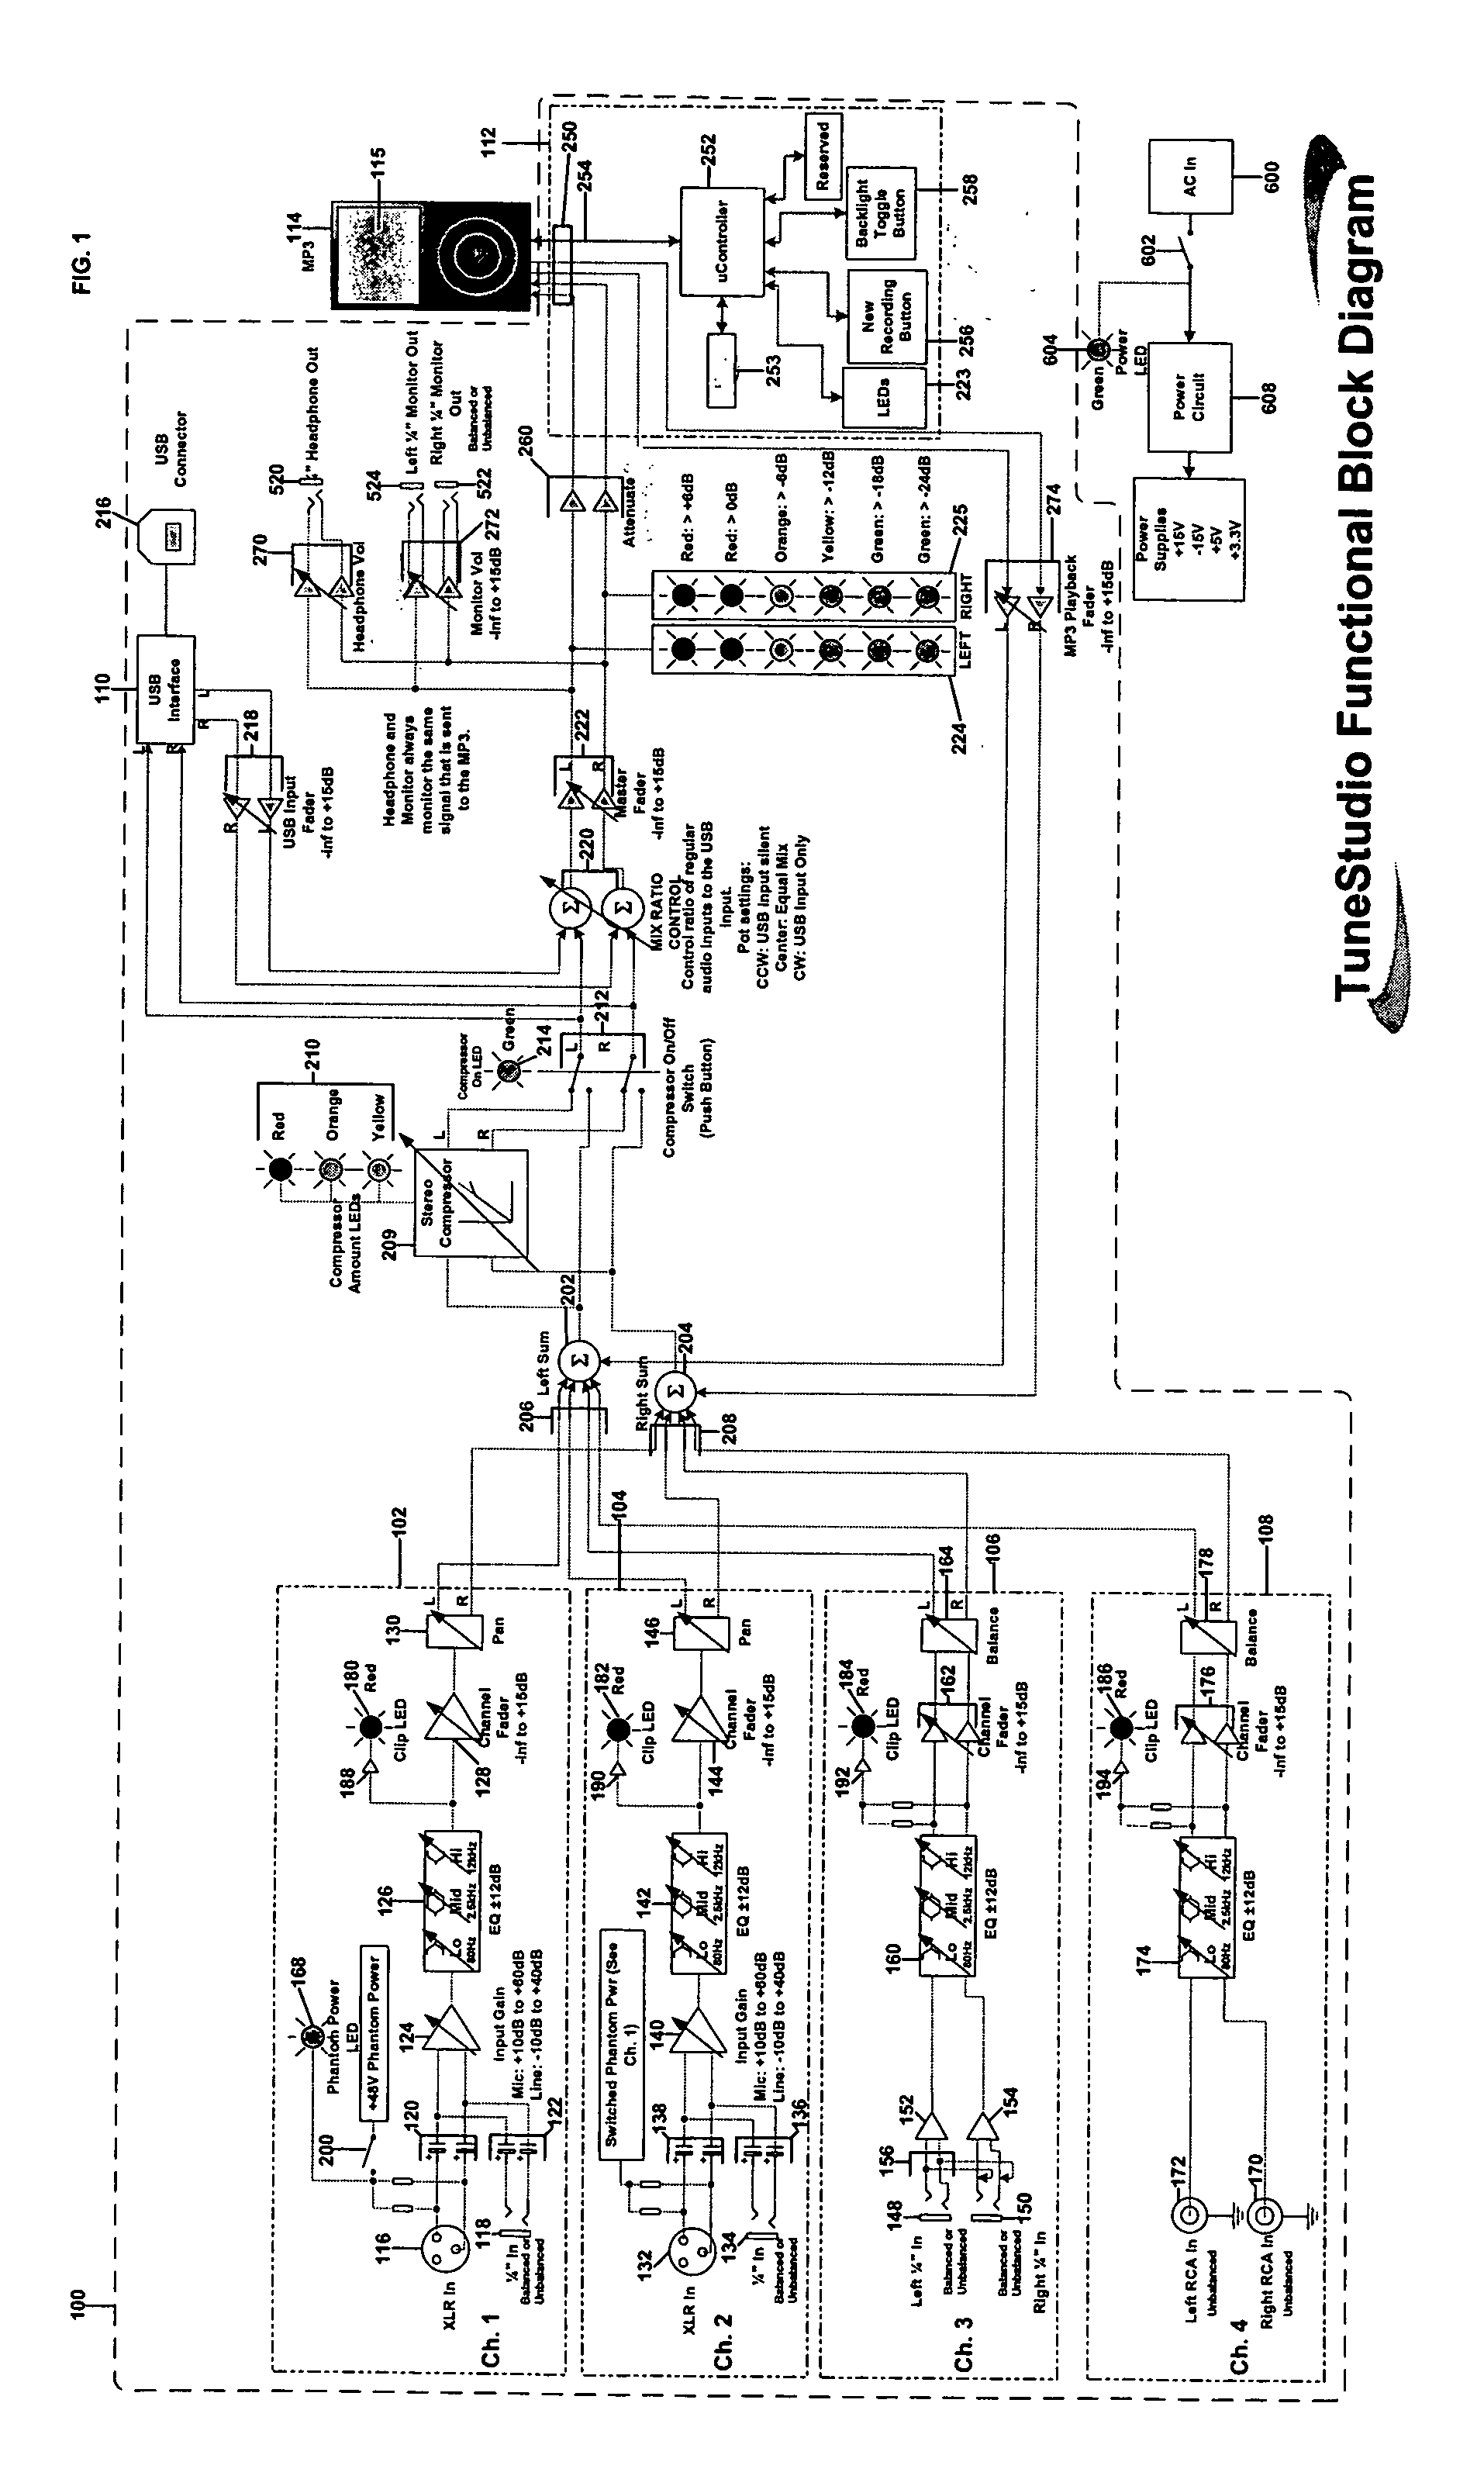 Mixing system for portable media device